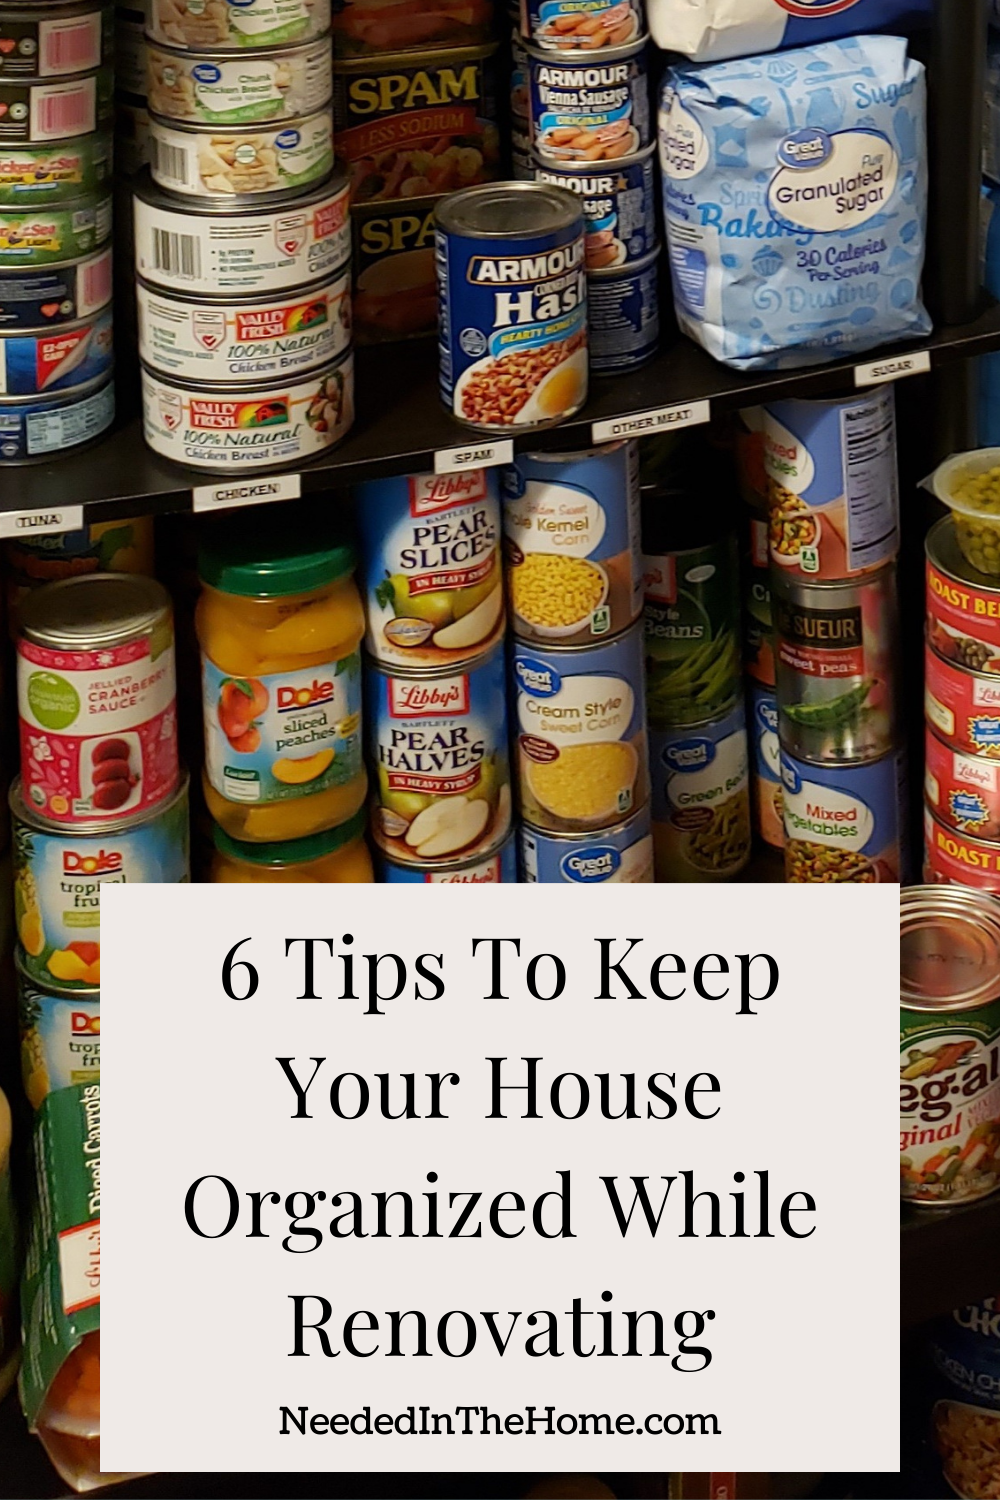 pinterest-pin-description 6 tips to keep your house organized while renovating labeled shelves of canned food neededinthehome